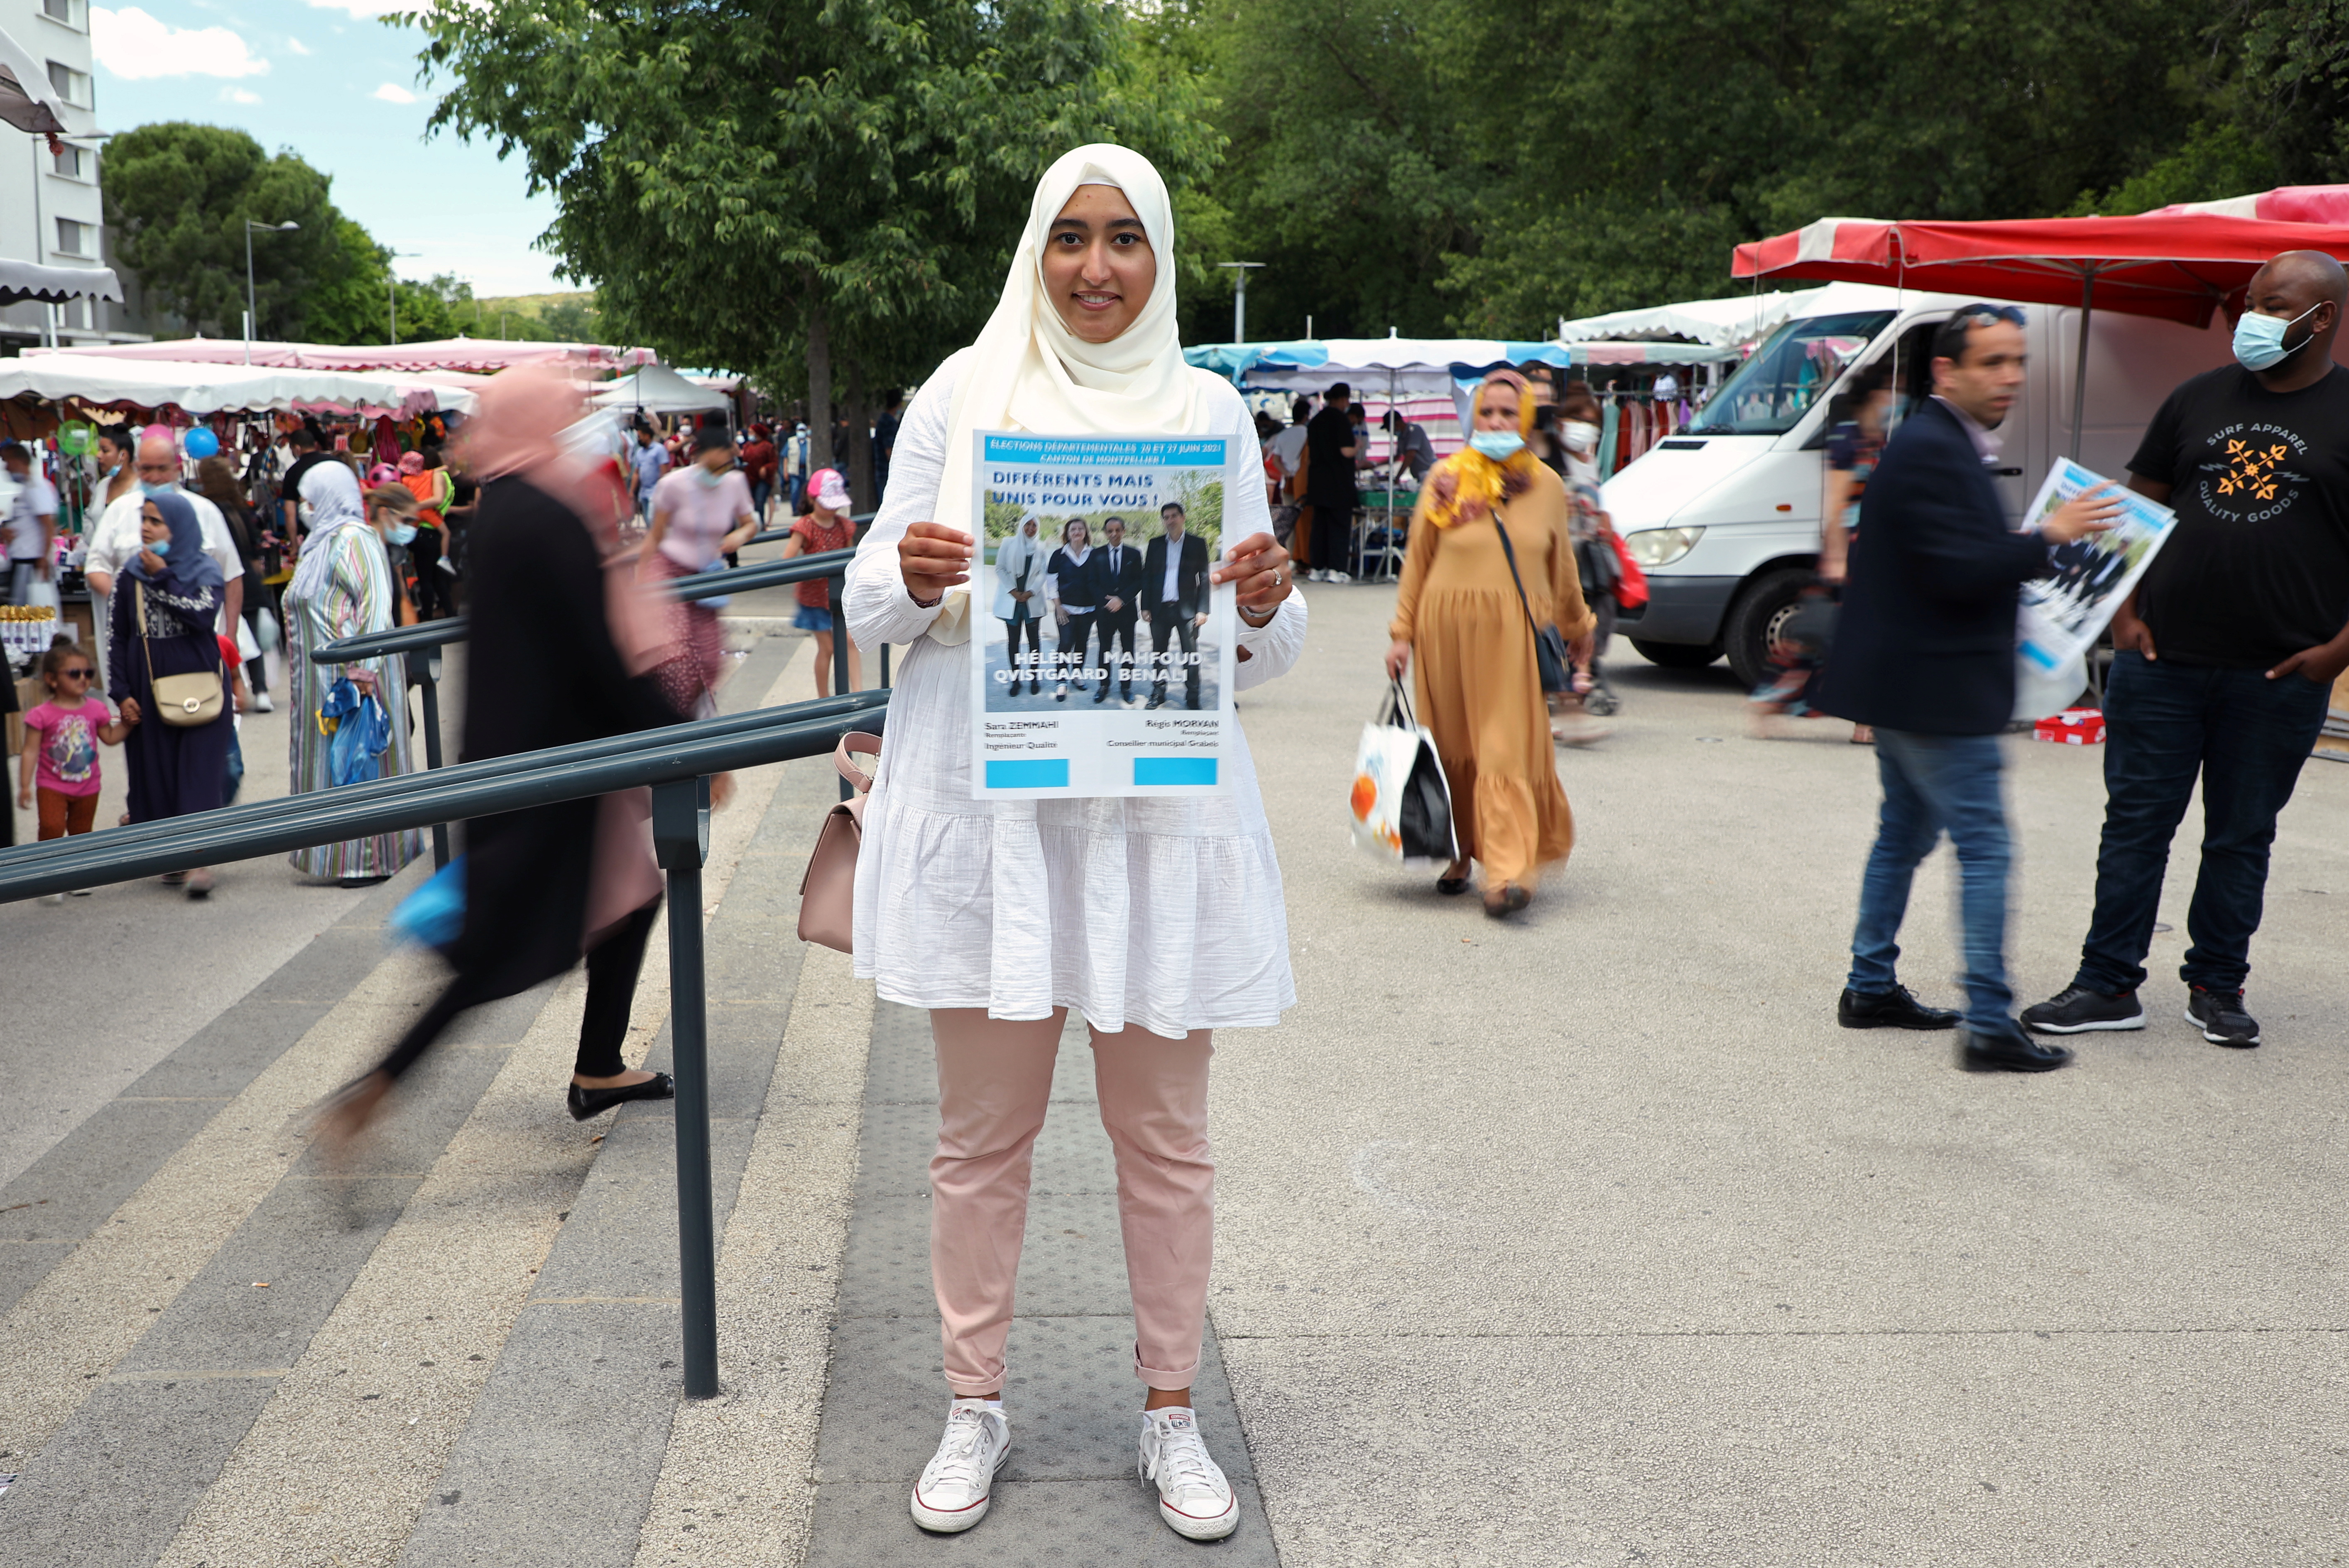 The candidate and her hijab: identity matters in French elections